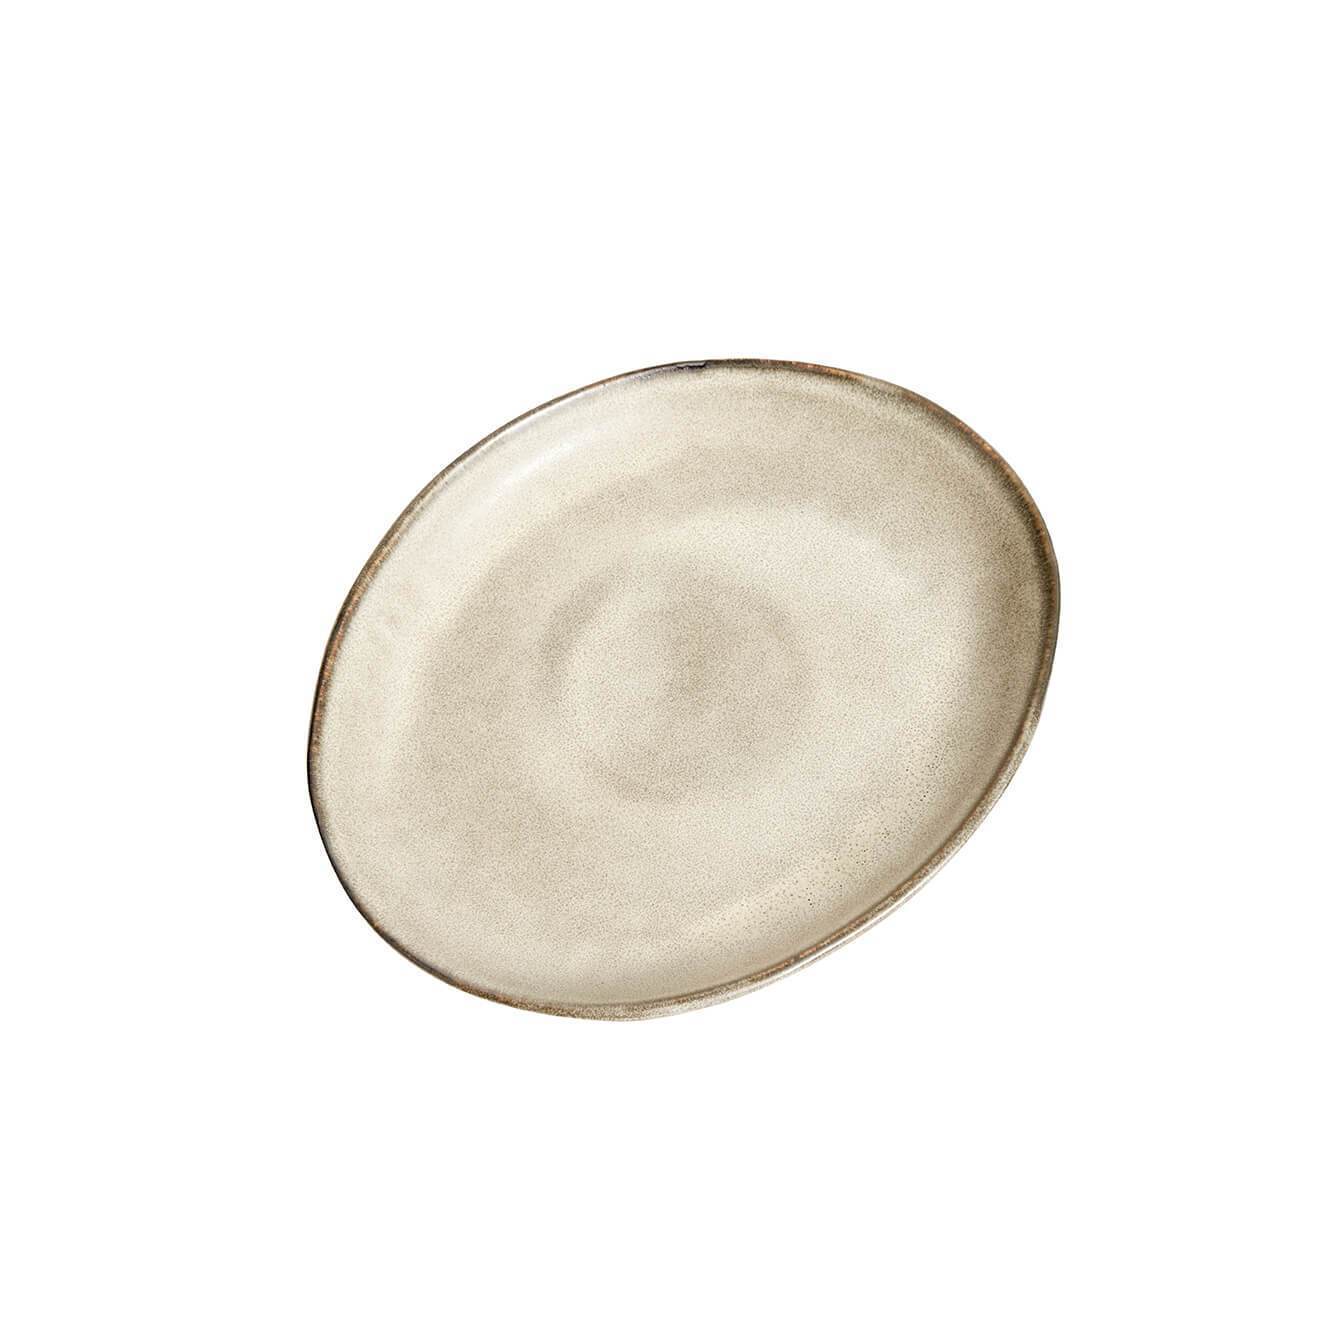 MUUBS MAME CORT PLATE OYSTER, 17,4 cm